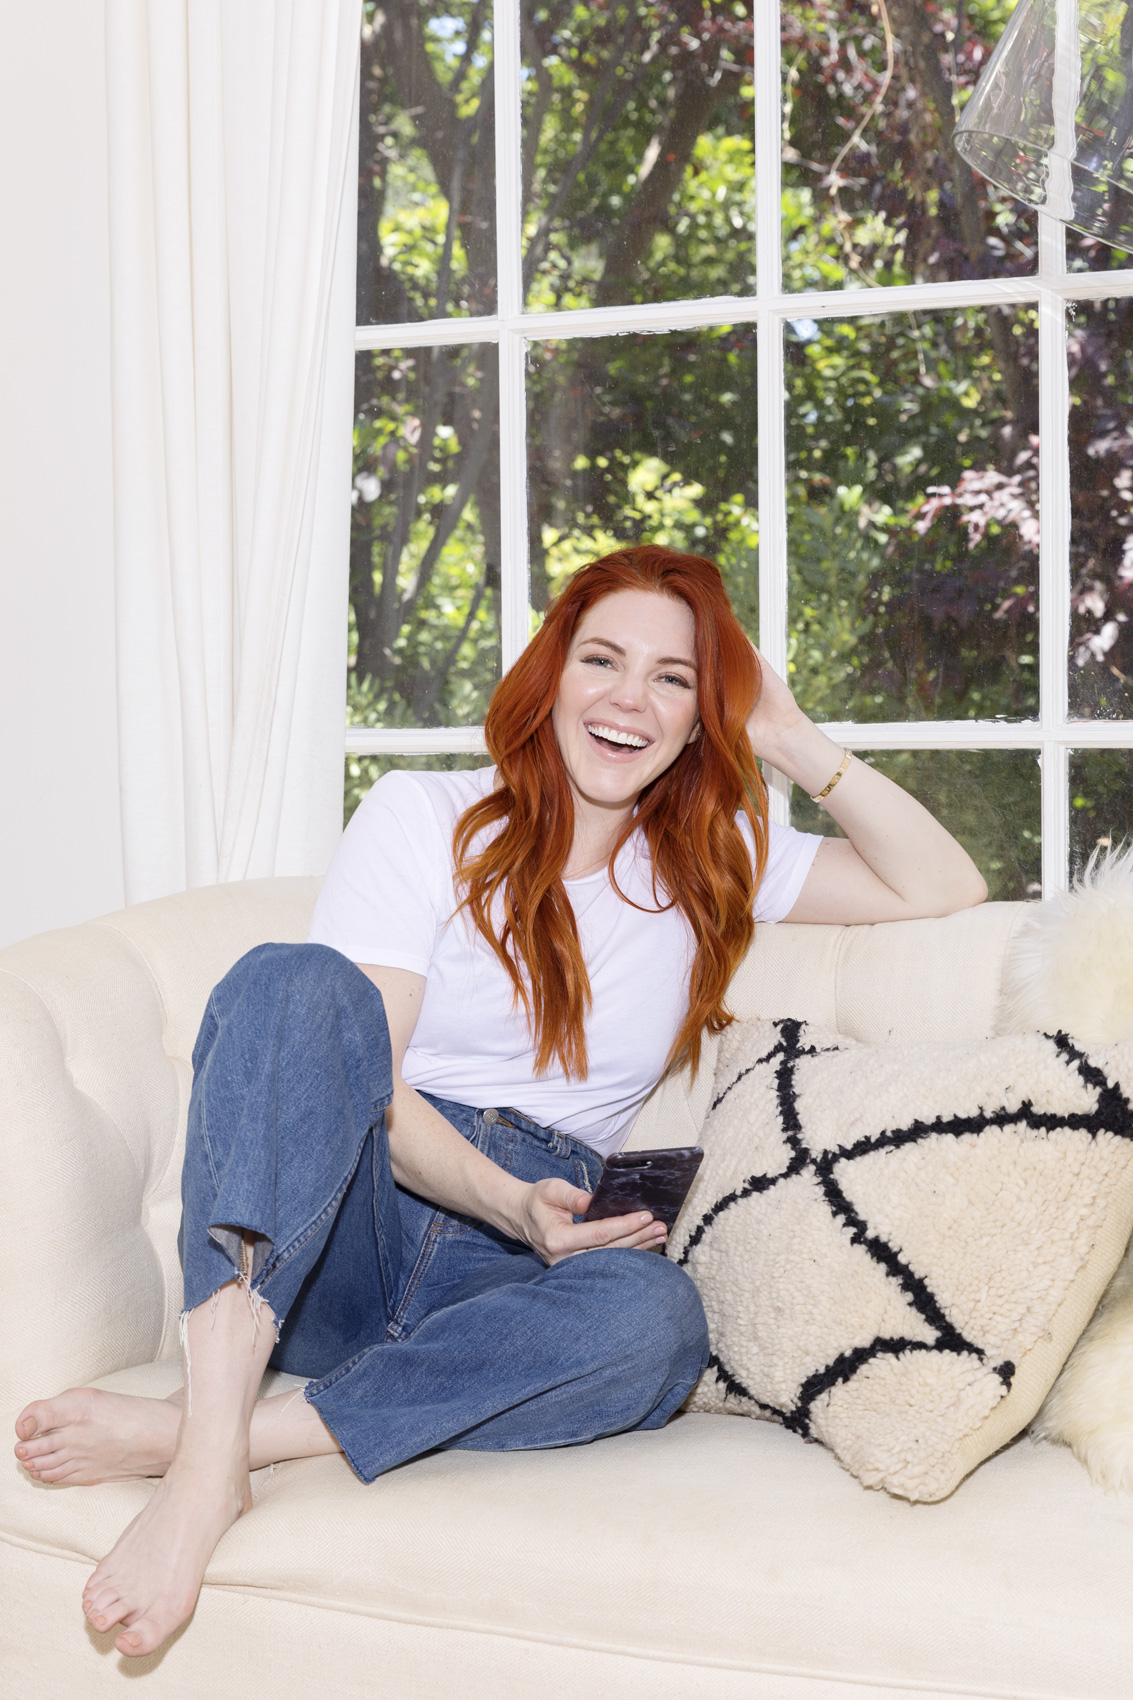 Girl with red hair sitting on a white sofa. Kim Genevieve Los Angeles Portrait Photographer